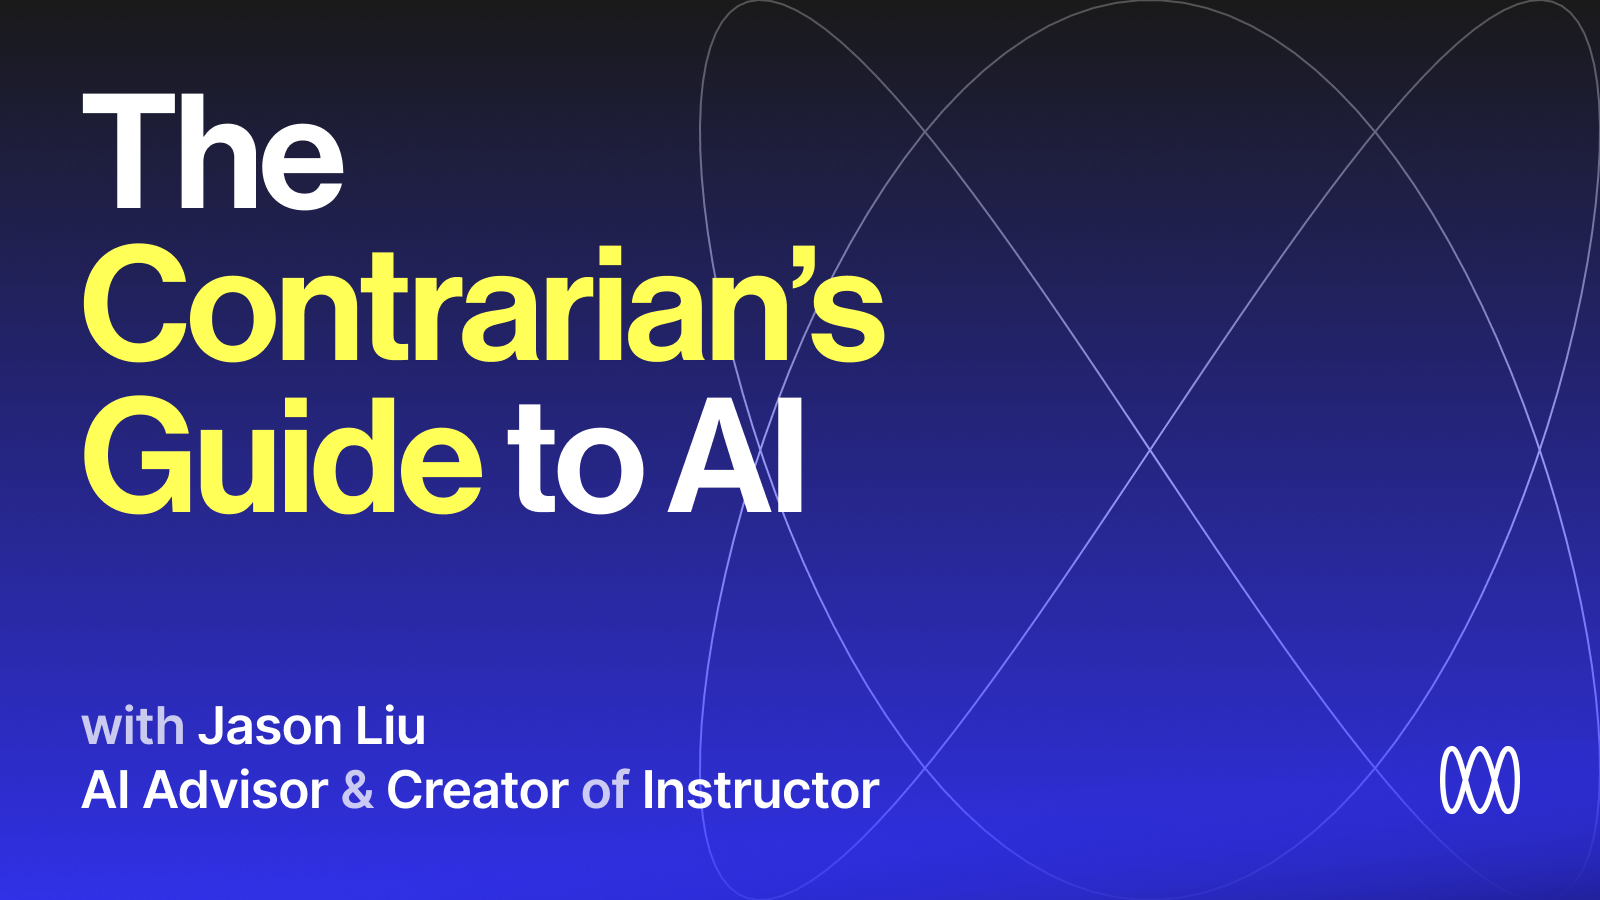 The Contrarian's Guide to AI